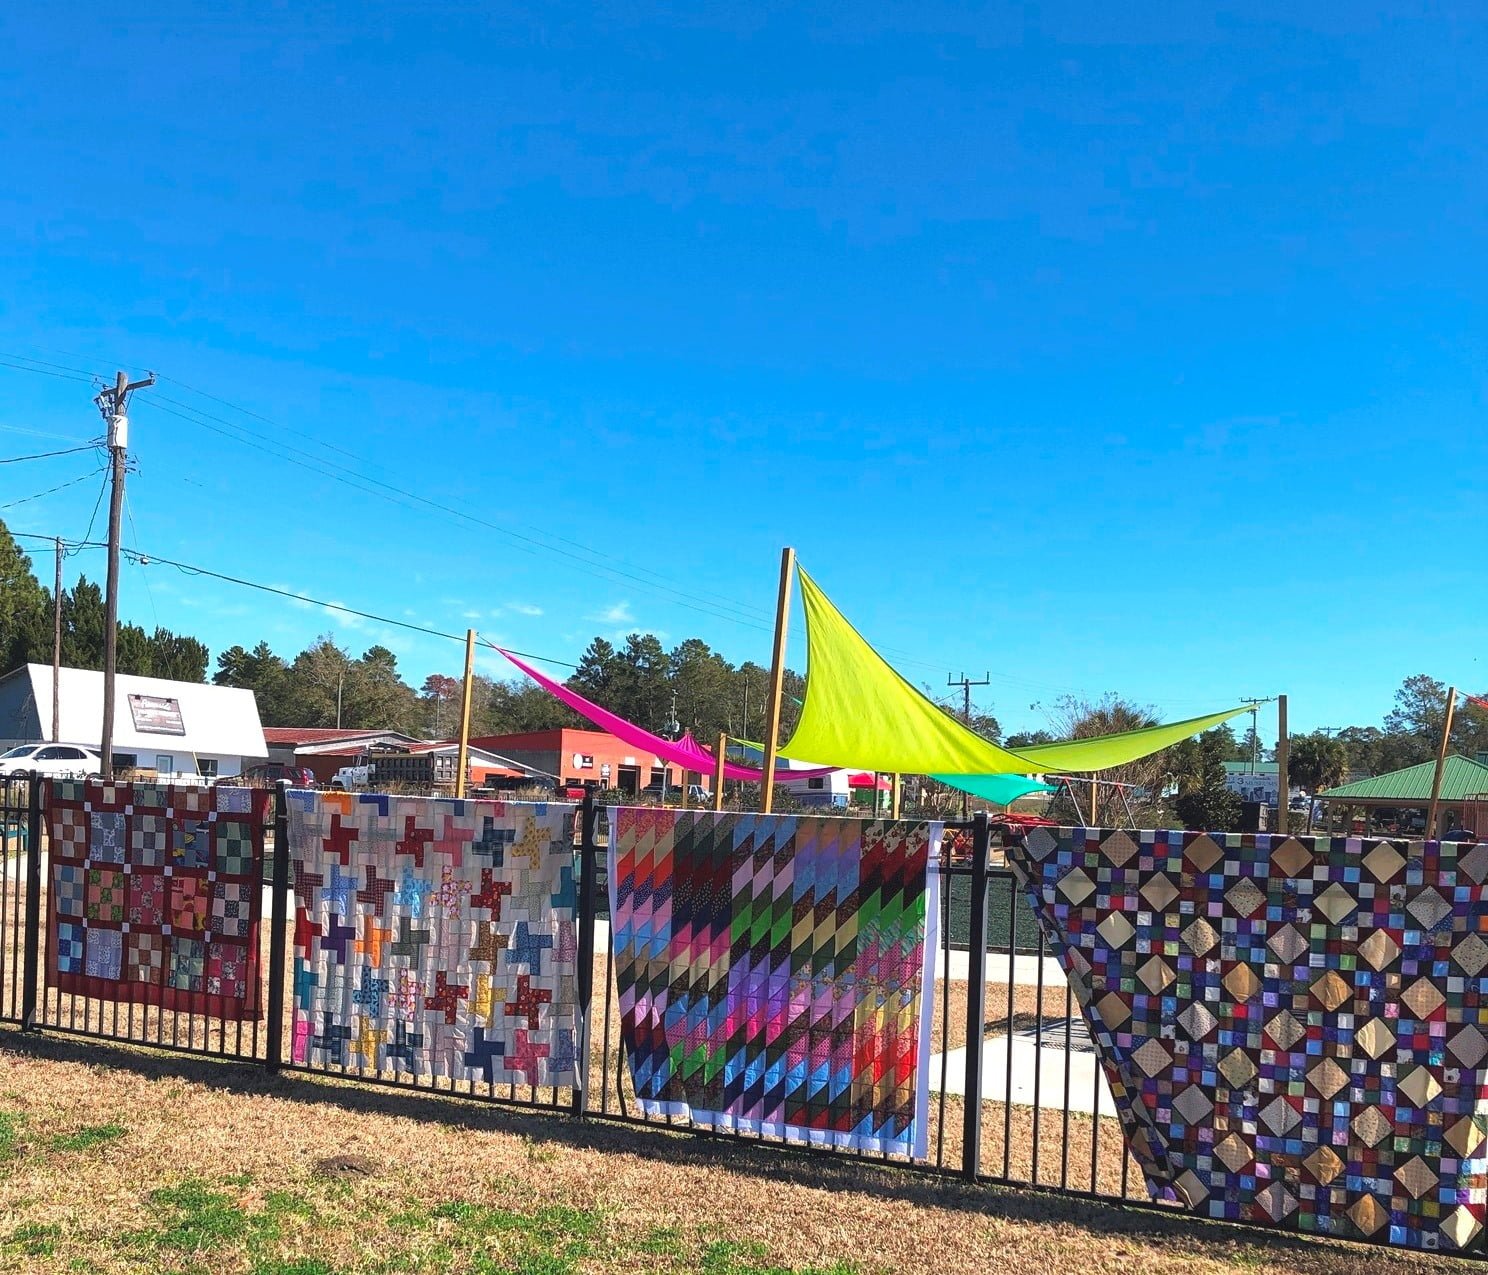 Colorful quilts hang on a chain link fence at a city park.